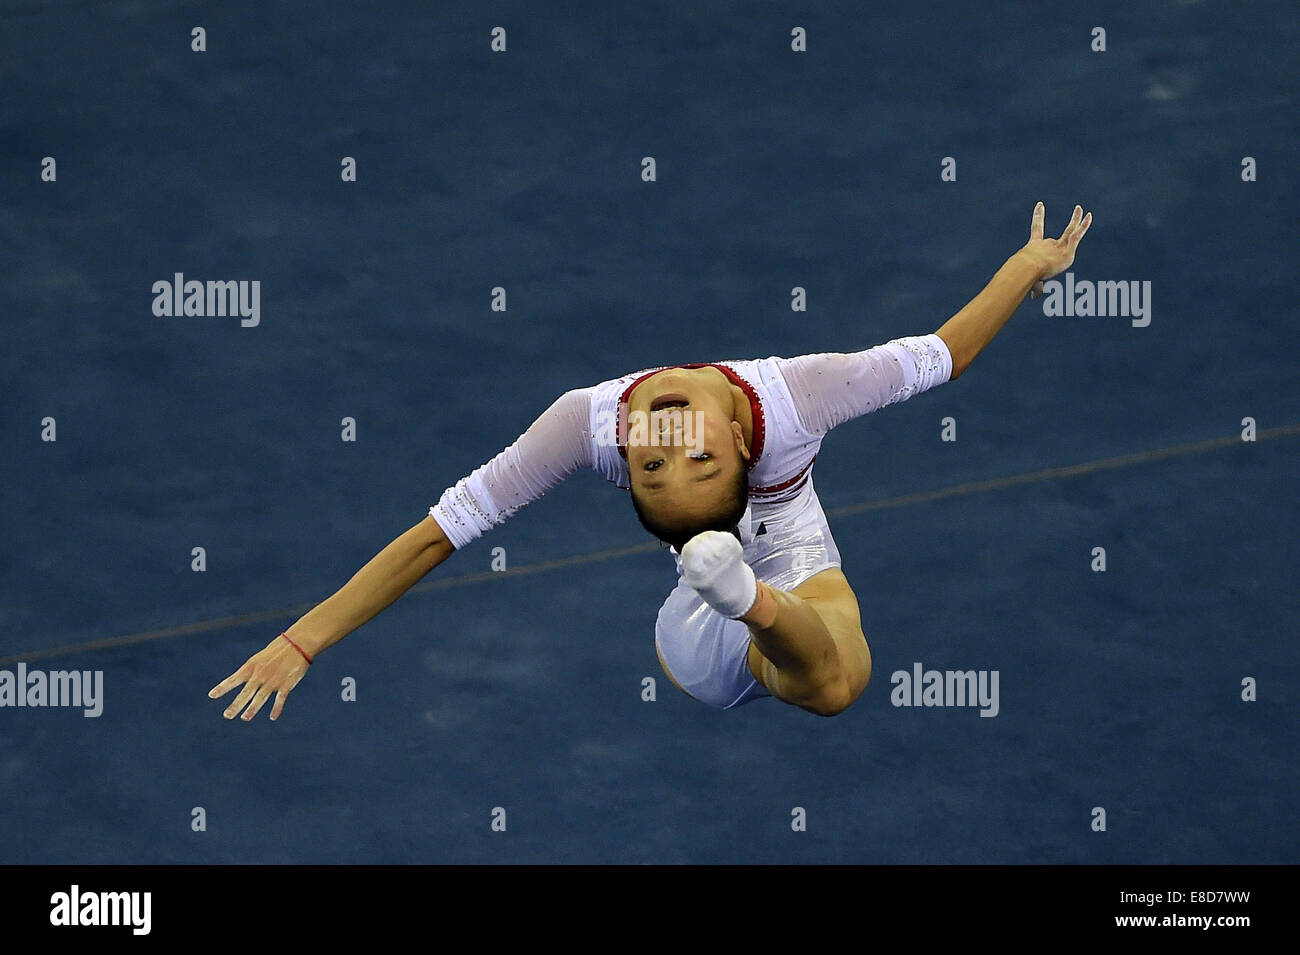 Nanning, China's Guangxi Zhuang Autonomous Region. 6th Oct, 2014. Chinese gymnast Yao Jinnan performs in the floor exercise during the women's qualifying round of the 45th Gymnastics World Championships in Nanning, capital of south China's Guangxi Zhuang Autonomous Region, Oct. 6, 2014. The 45th FIG Artistic Gymnastics World Championships lasts from Oct. 3 to 12 in Nanning. Credit:  Liu Jun/Xinhua/Alamy Live News Stock Photo